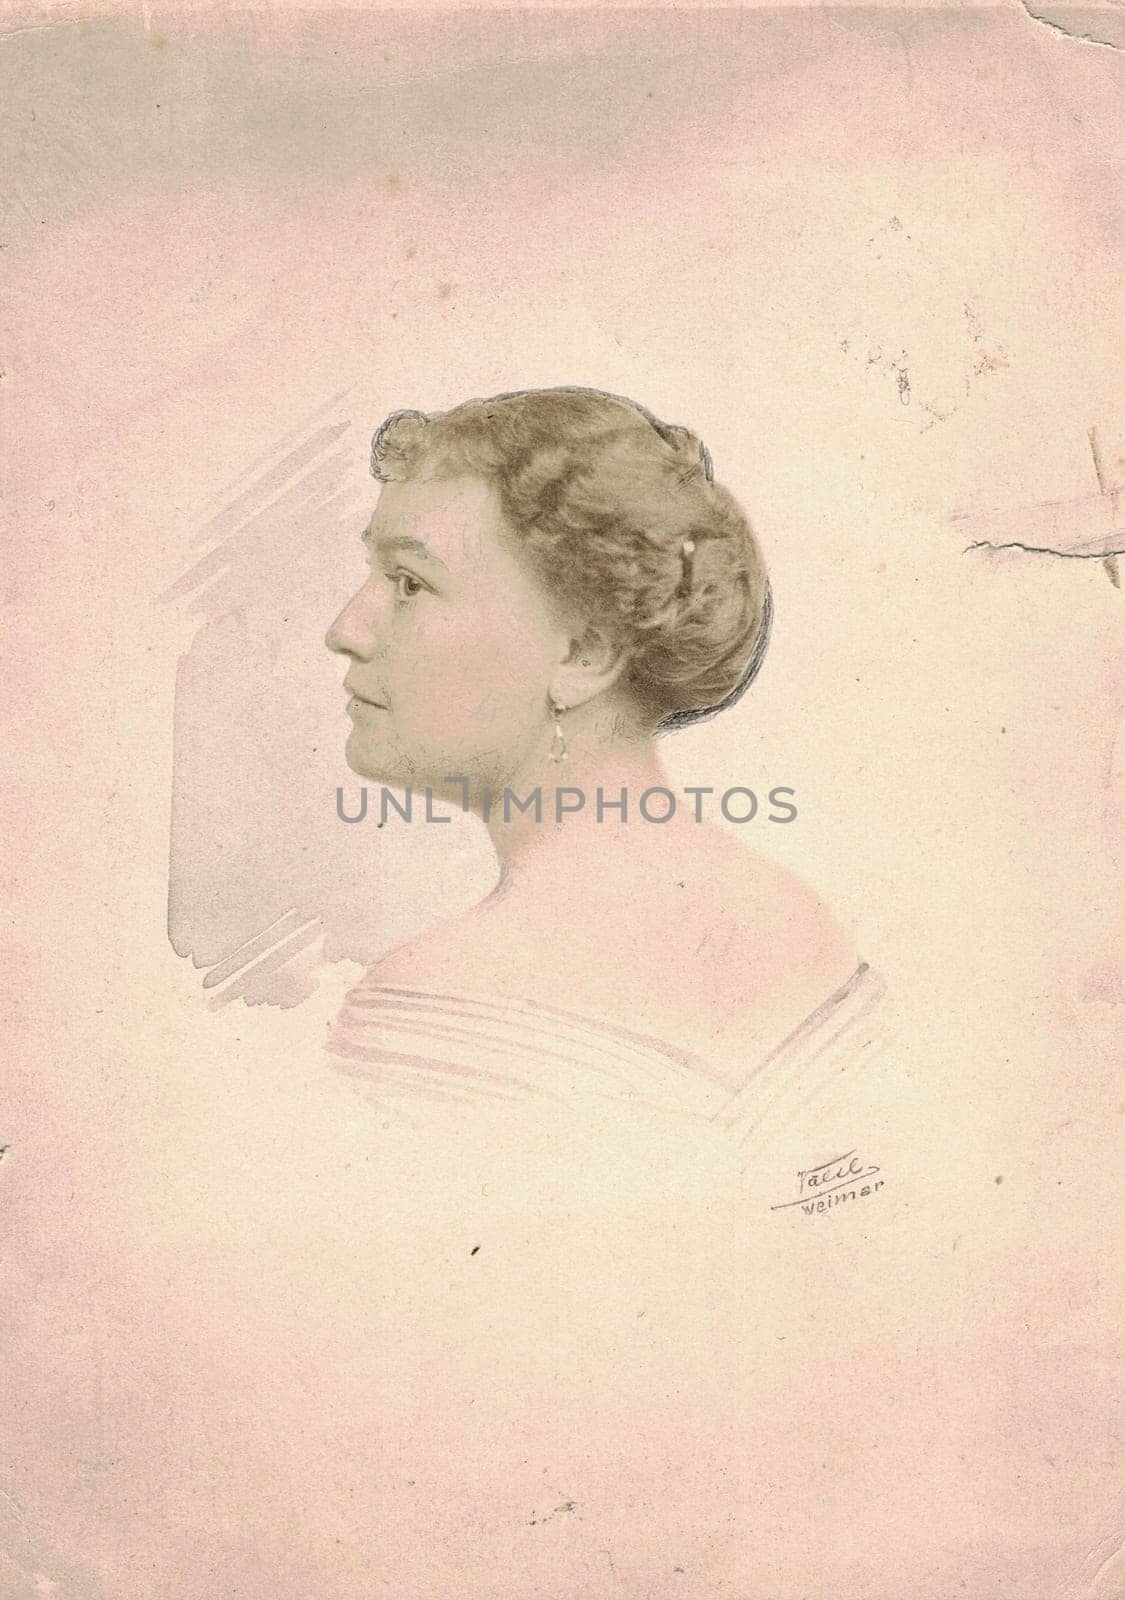 GERMANY - CIRCA 1910s: Vintage photo shows dreamy portrait of woman. Woman wears earrings, the neck and body is hand painted additionally. Black & white antique photography.